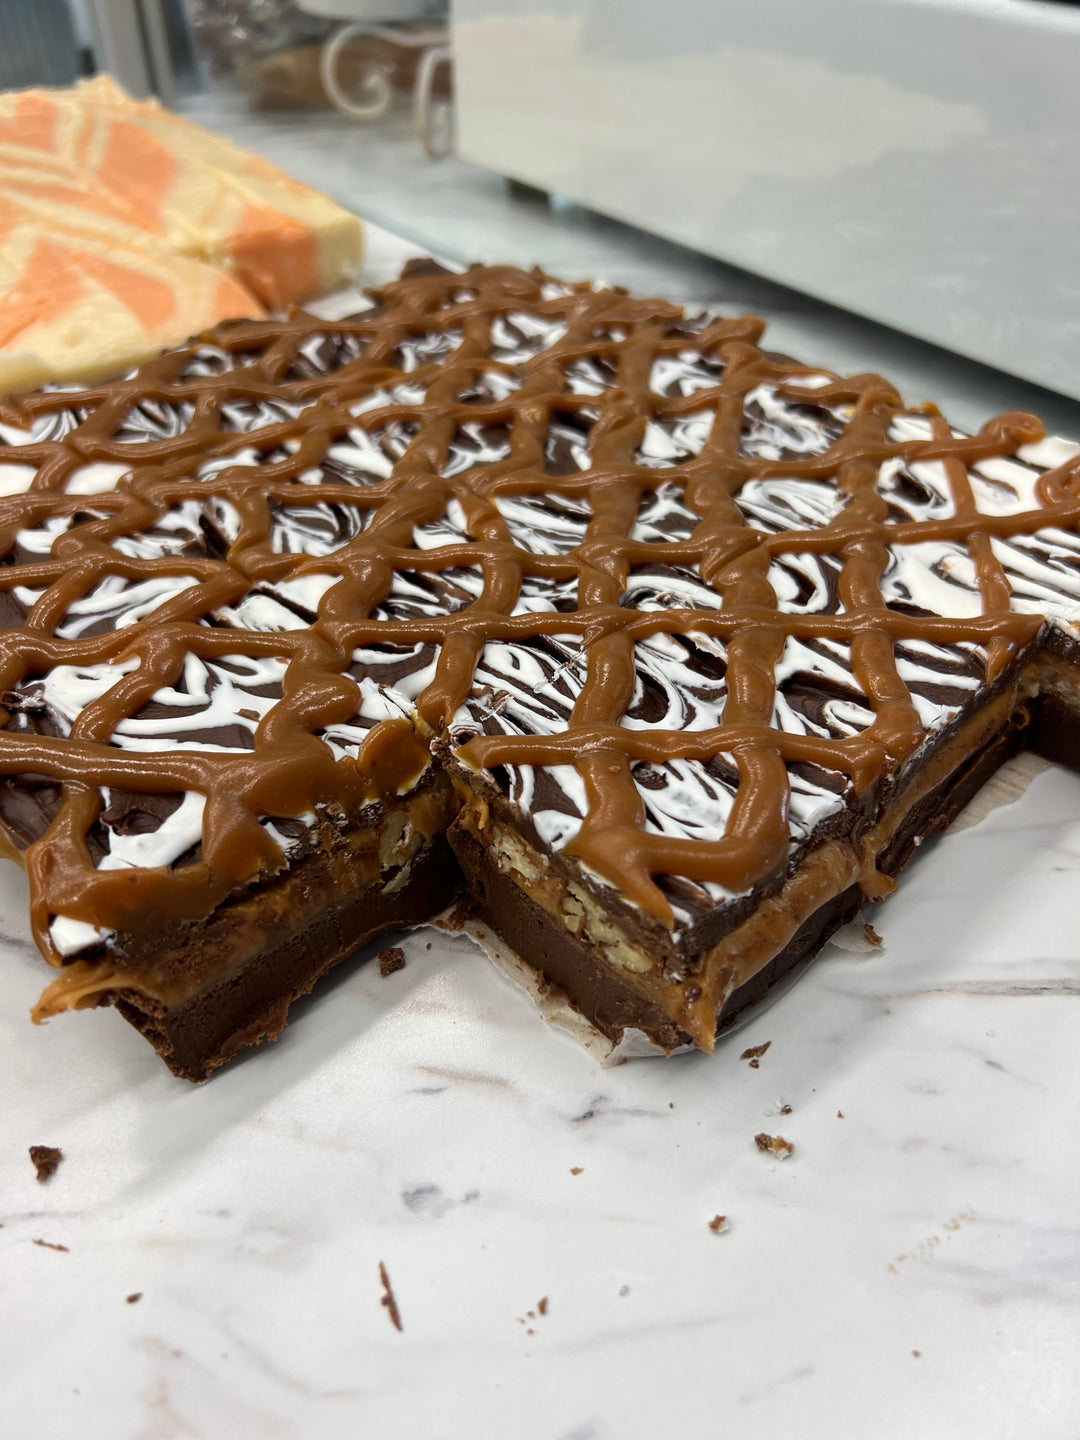 TorTush (Turtle) Fudge - Chocolate fudge with a gooey caramel nut center and white chocolate/ caramel topping